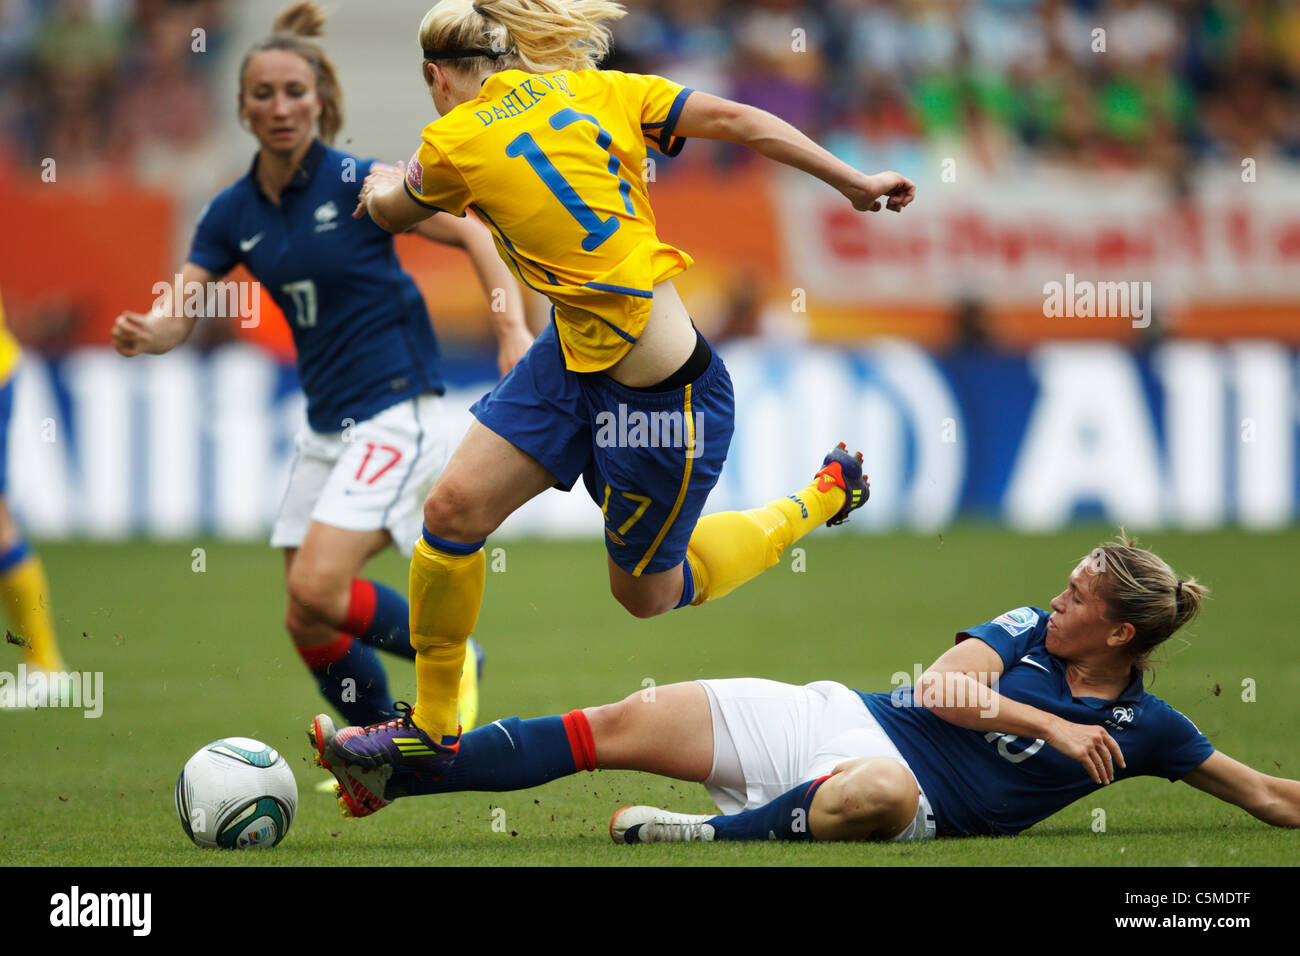 Camille Abily of France (r) slides to tackle Lisa Dahlkvist of Sweden (l) during the 2011 Women's World Cup third place match. Stock Photo